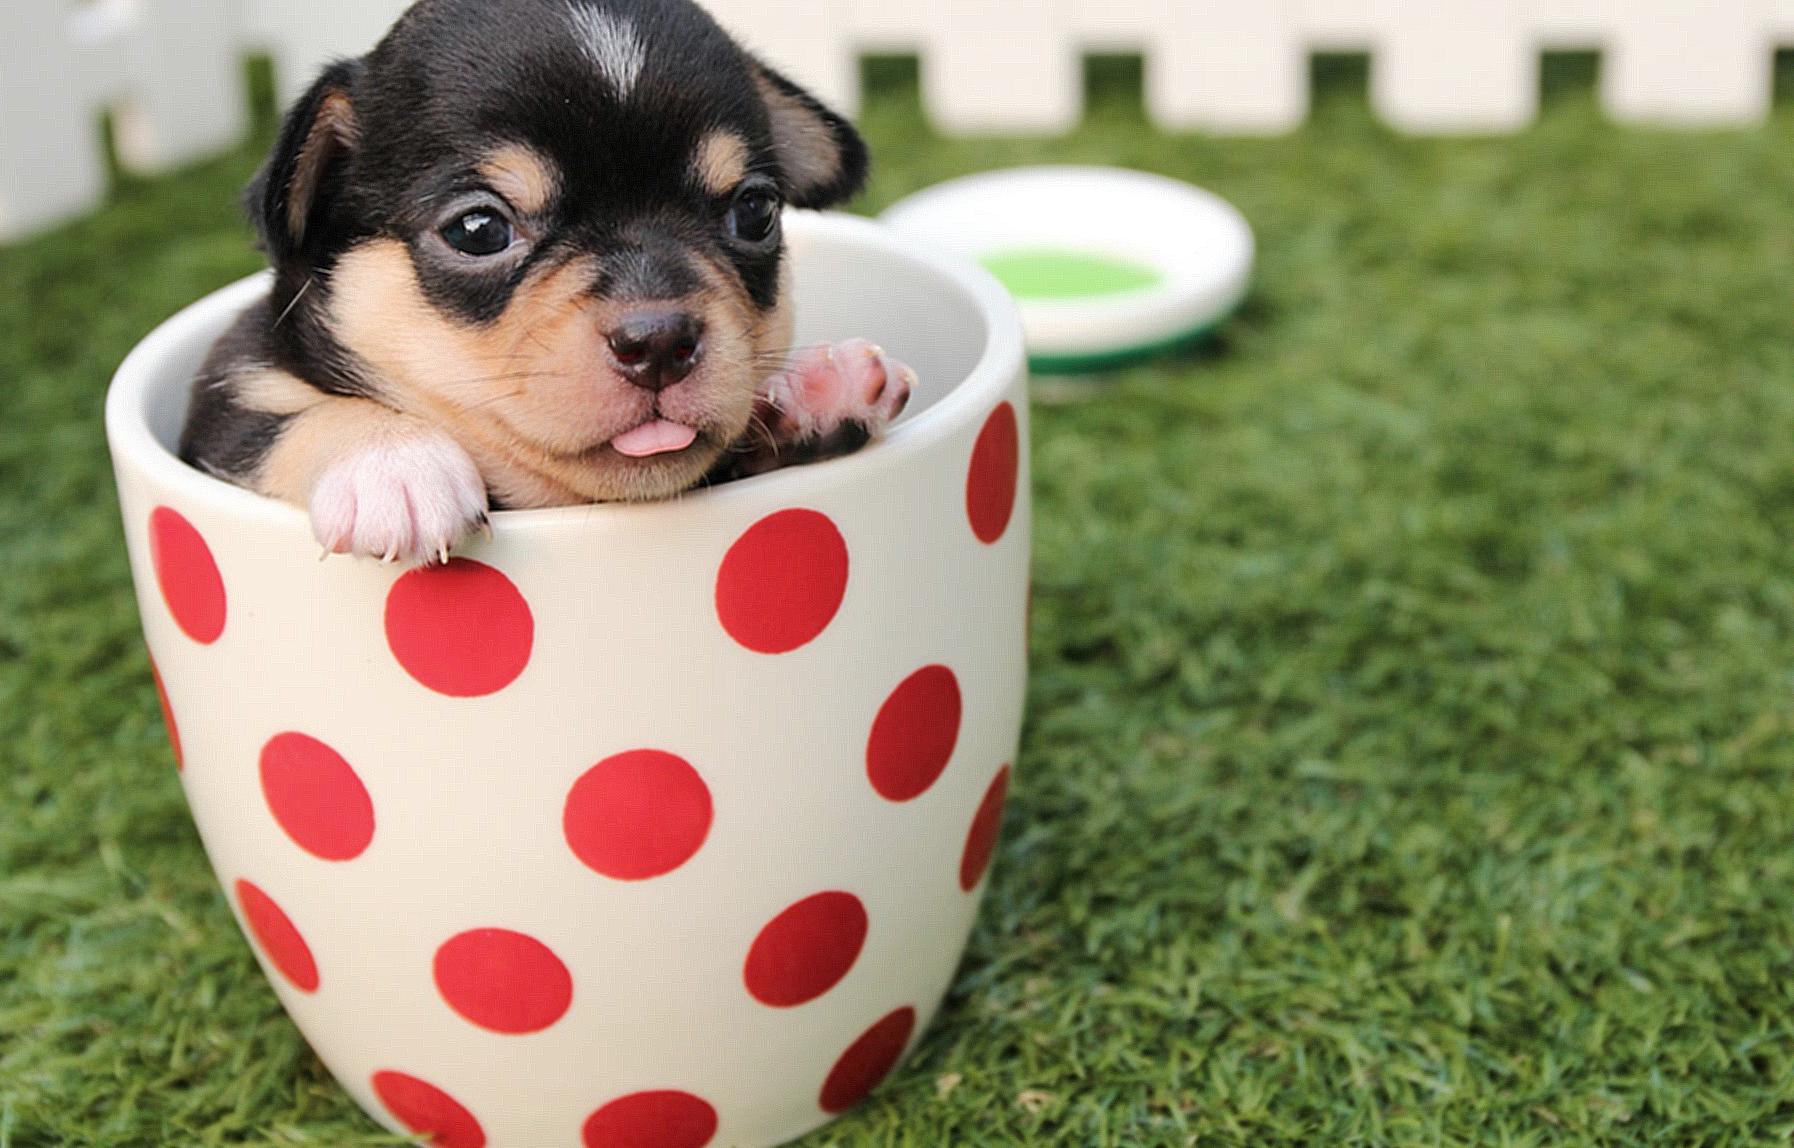 Short-coated Black and Brown Puppy in White And Red Polka-dot Ceramic Mug on Green Field